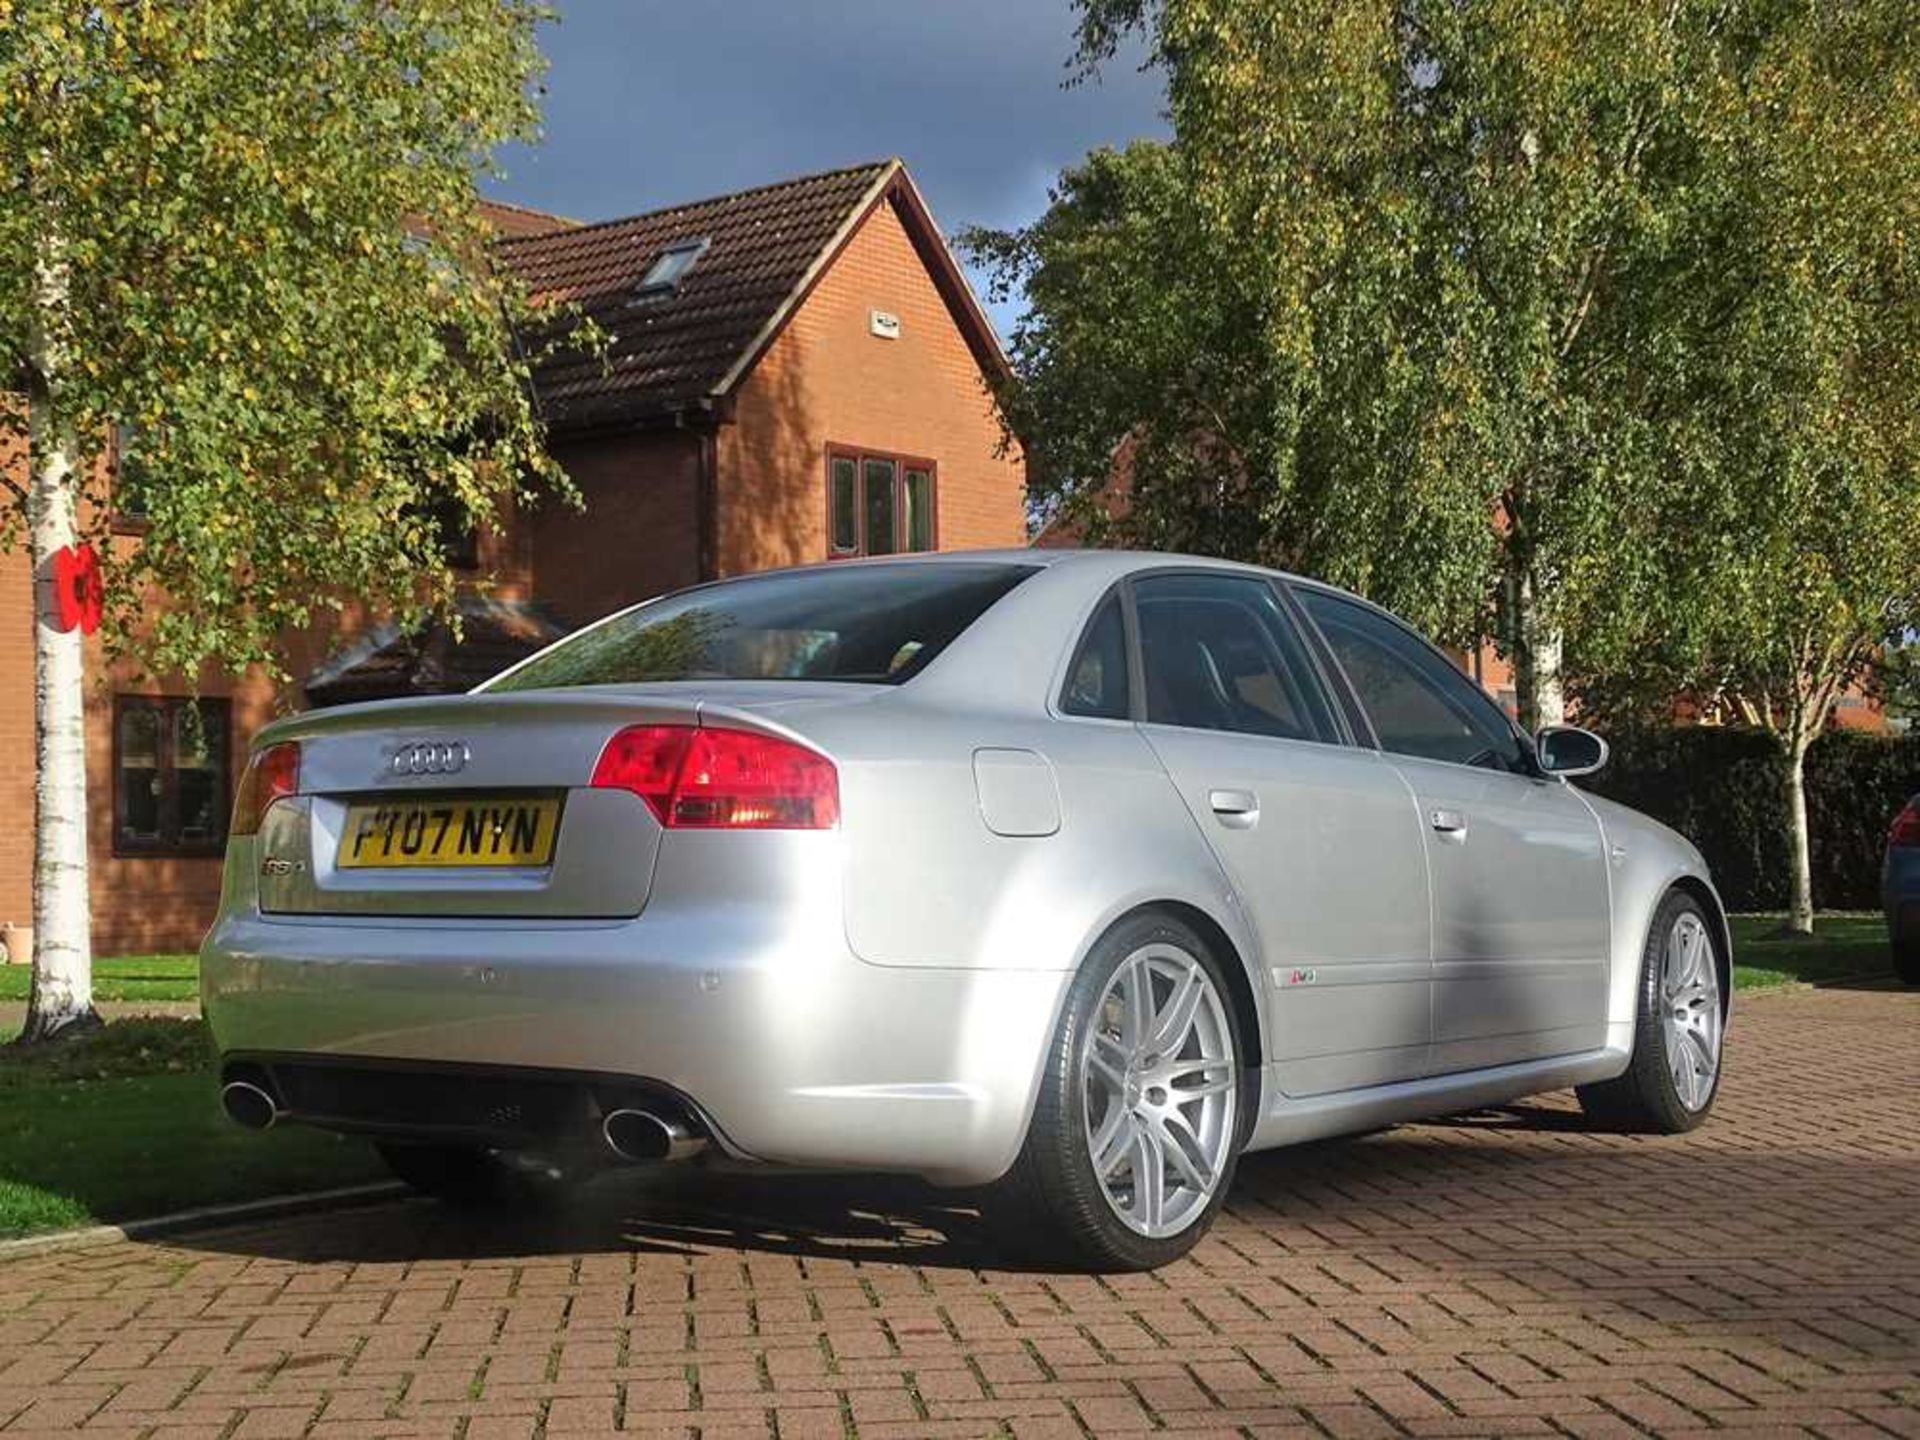 2007 Audi RS4 Saloon One owner and just c.60,000 miles from new - Image 78 of 86